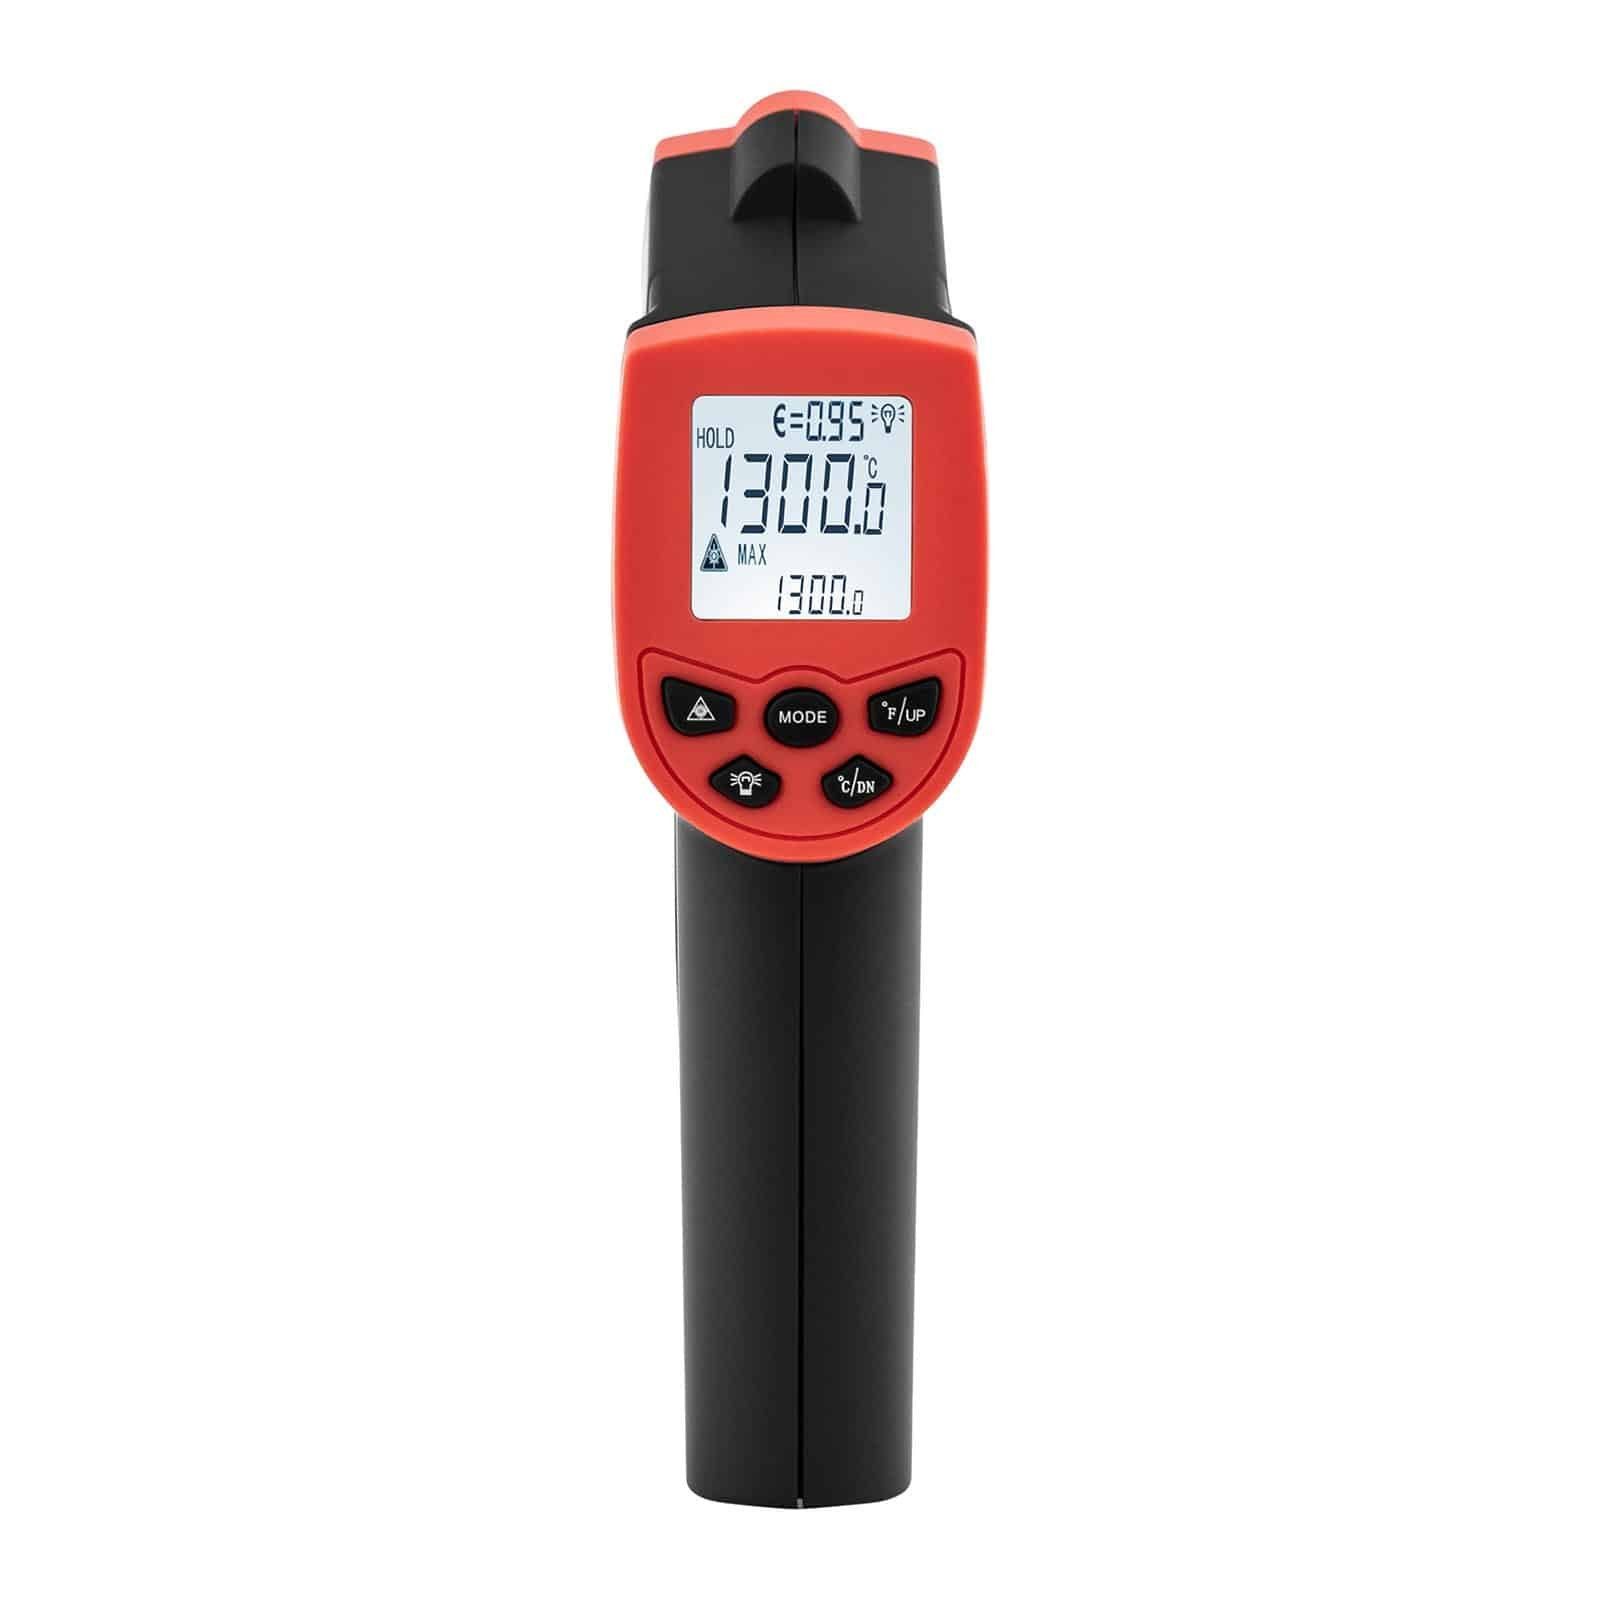 bis Thermometer Laser Infrarot-Thermometer Infrarot-Thermometer -50 Temperaturmessgerät Steinberg Systems